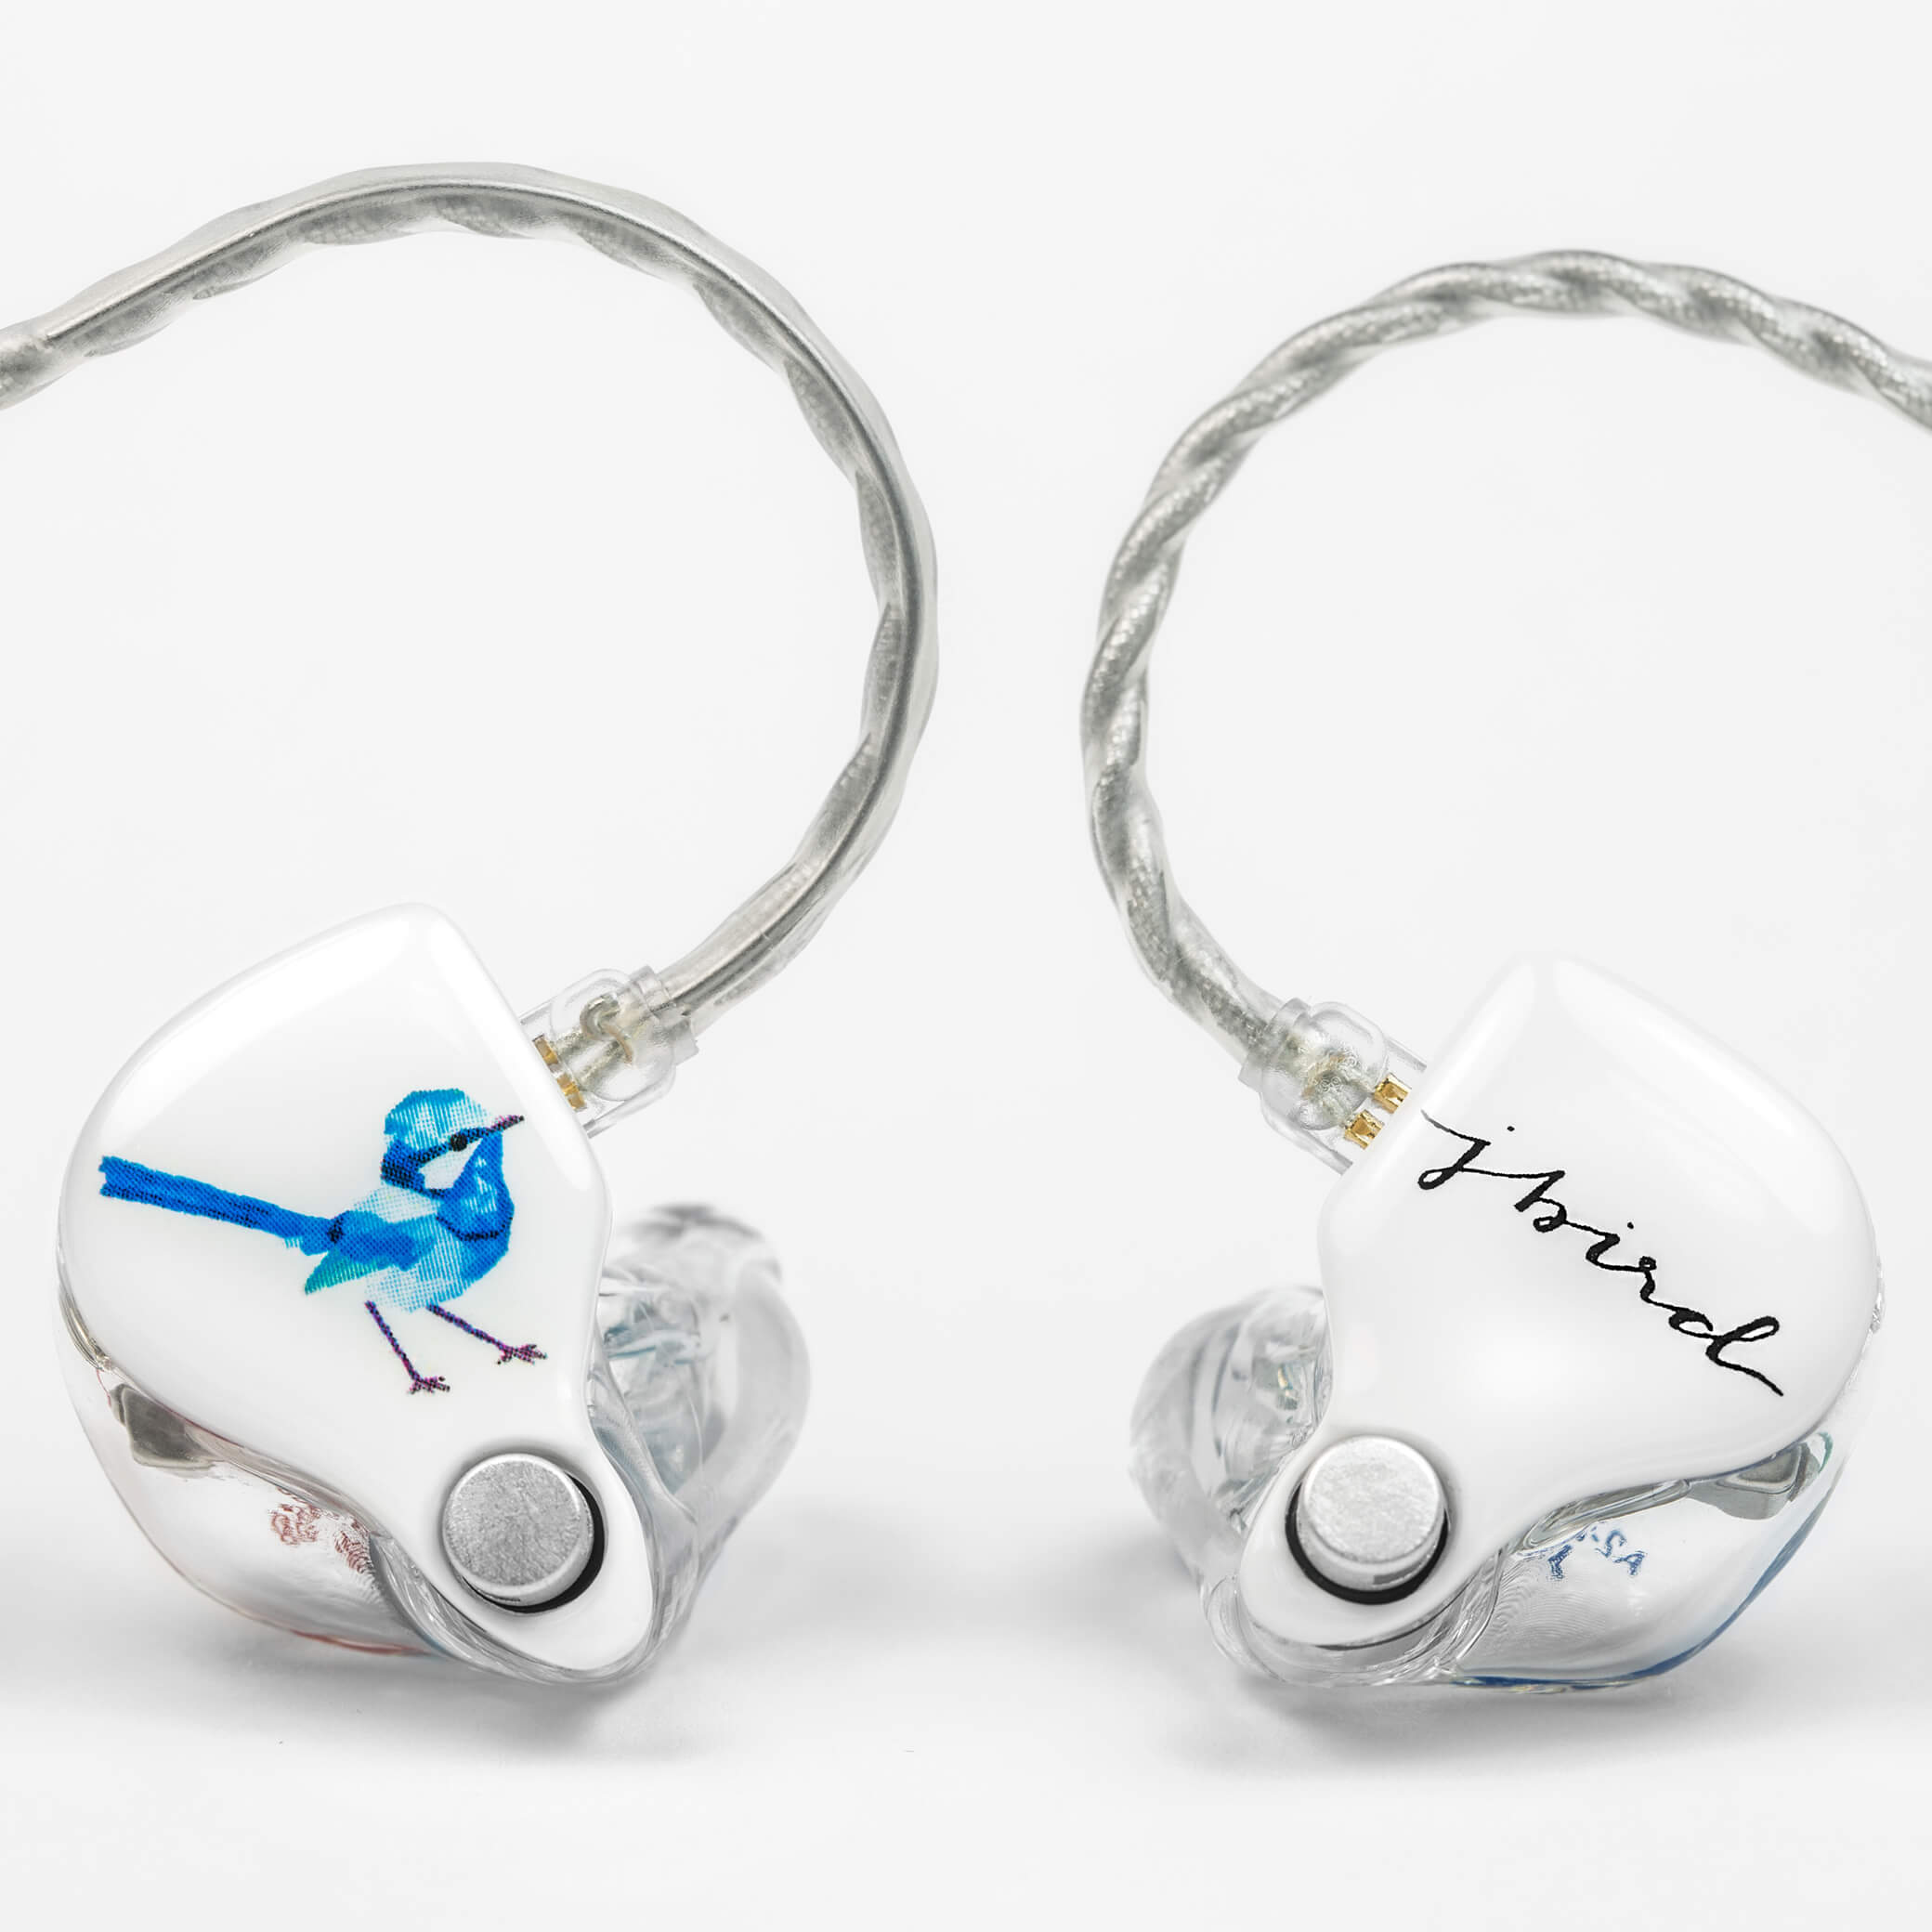 Custom In-Ears: Perfectly adapted to the ears and Made in Germany